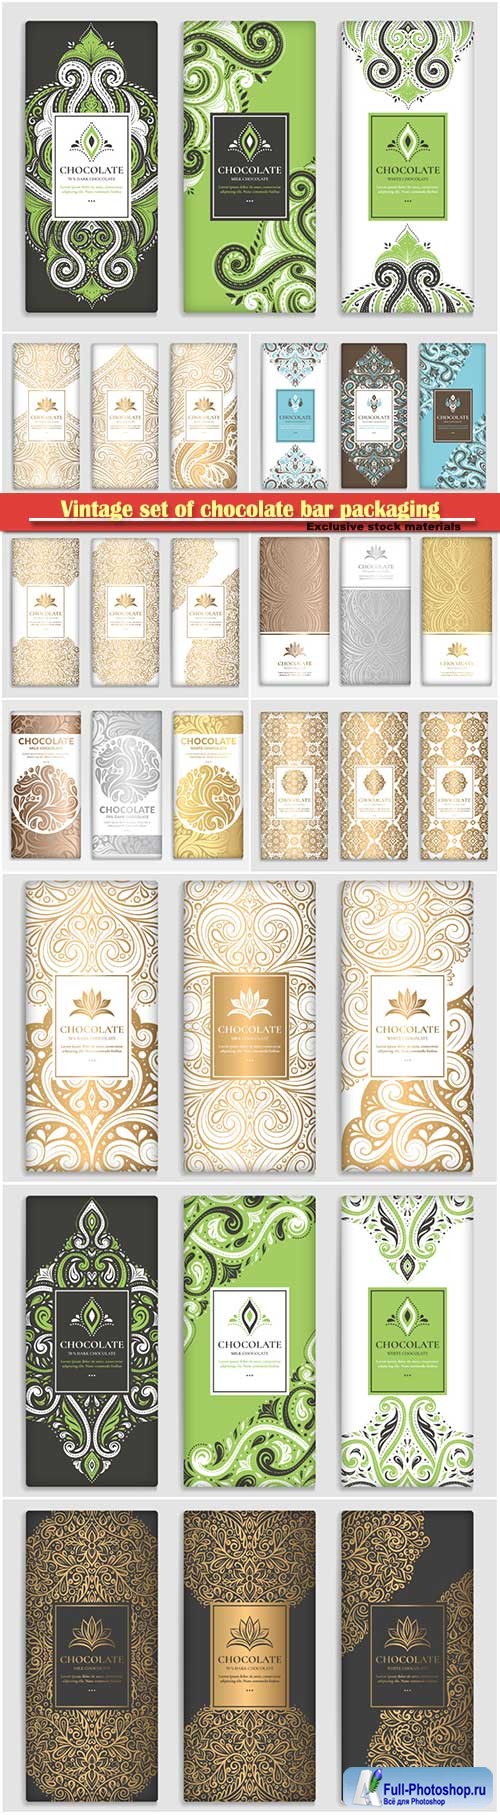 Vintage set of chocolate bar packaging design, vector luxury template with ornament elements